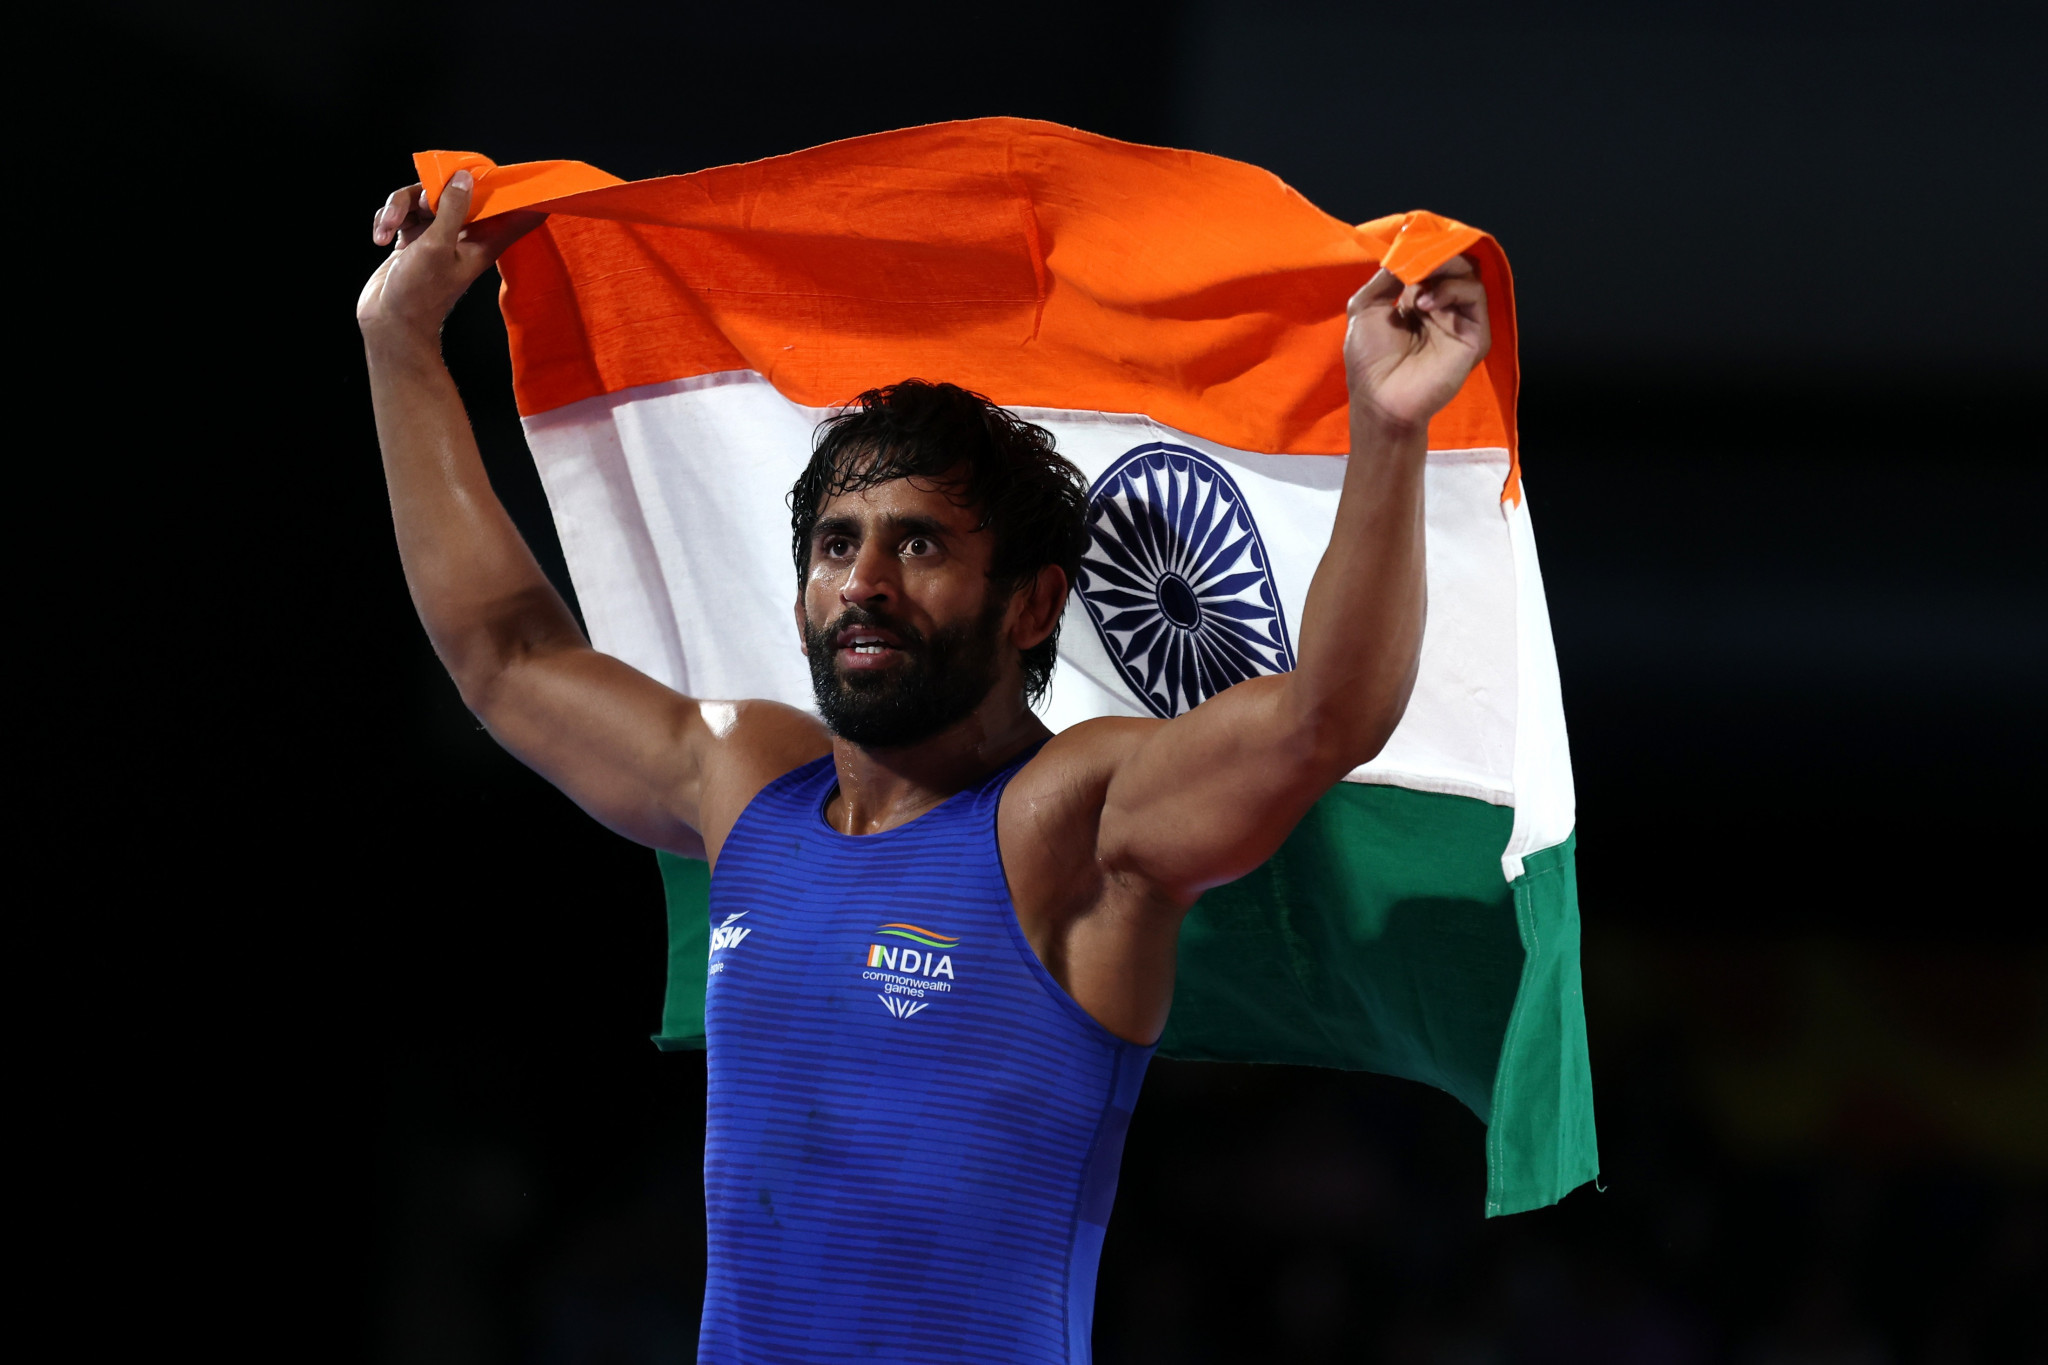 India captures three golds on first day of wrestling at Birmingham 2022